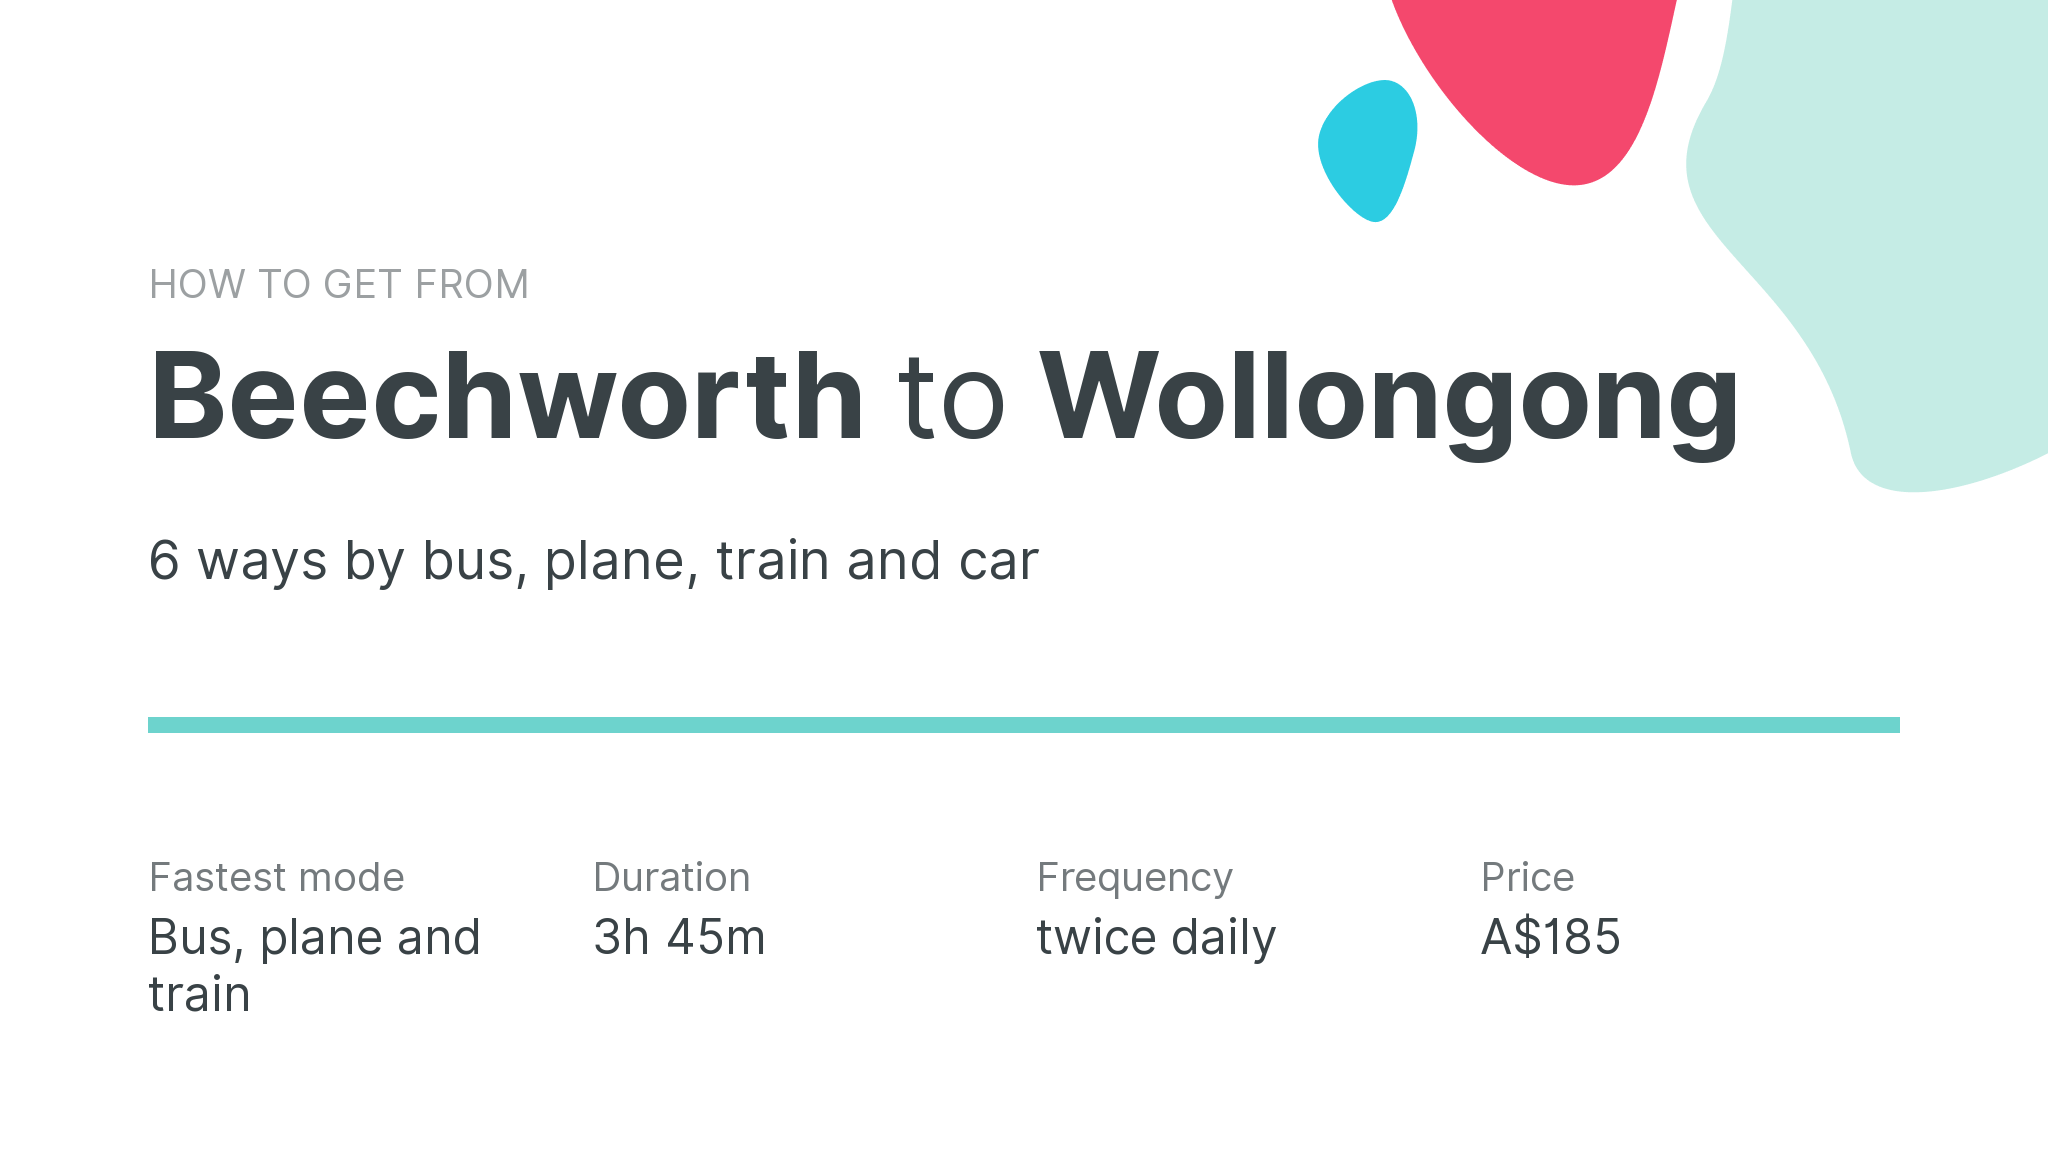 How do I get from Beechworth to Wollongong